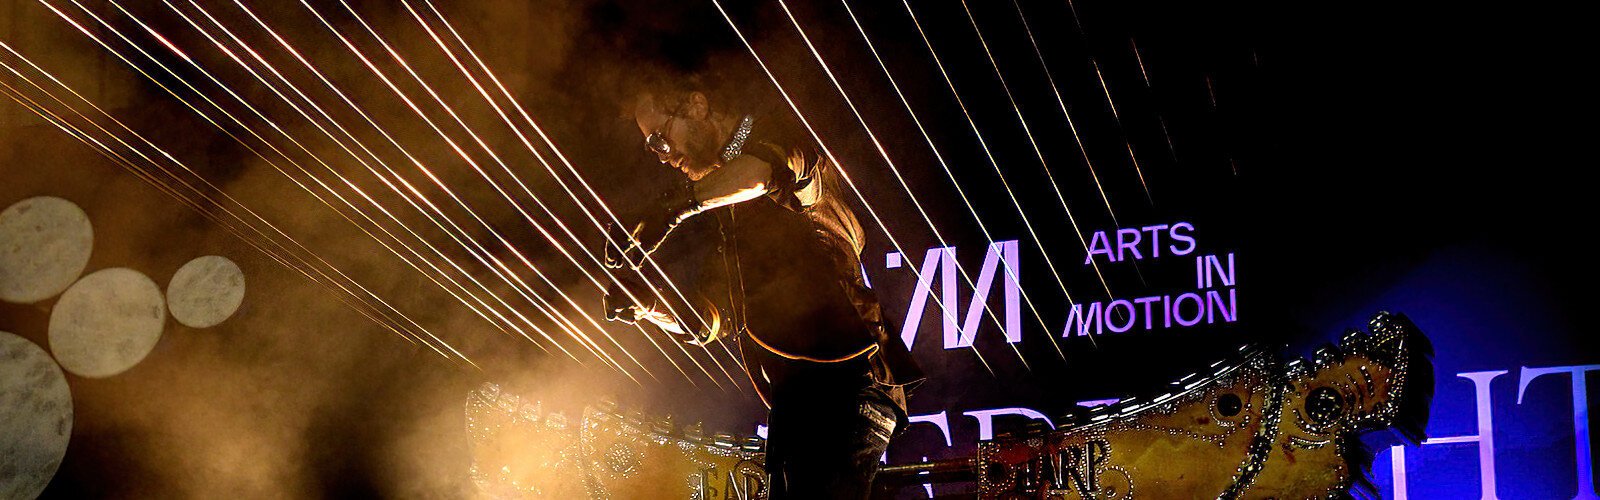 Performing on the earth harp as part of the WATERLICHT experience, William Close is the inventor of the earth harp, the world’s longest string instrument that uses architecture and landscapes to create a unique sound.